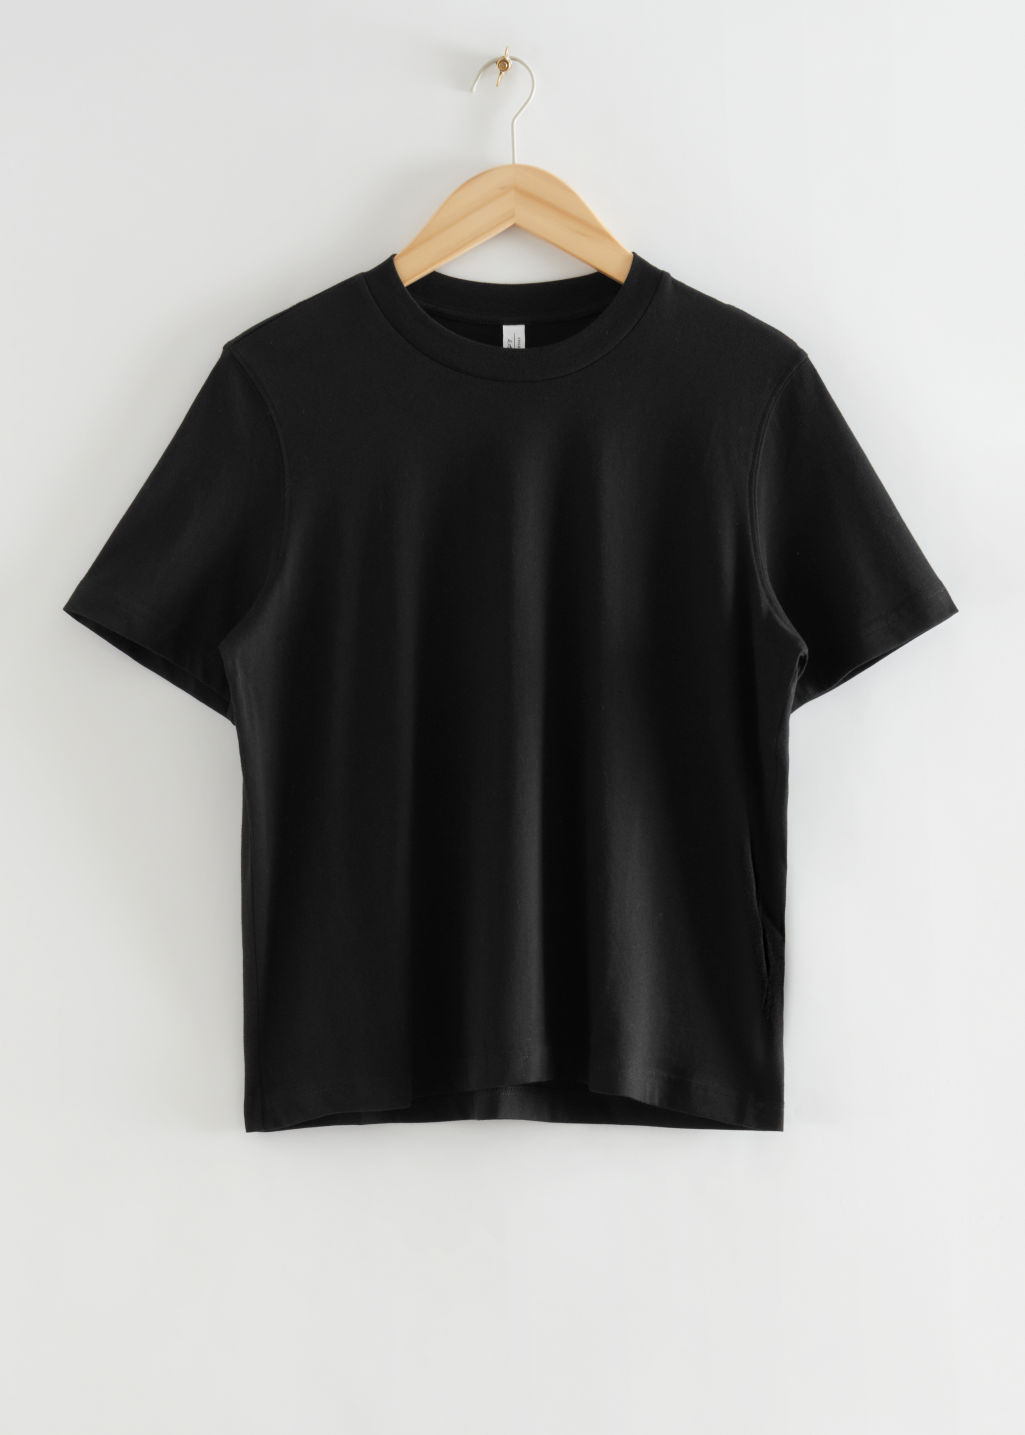 & Other Stories + Relaxed T-Shirt